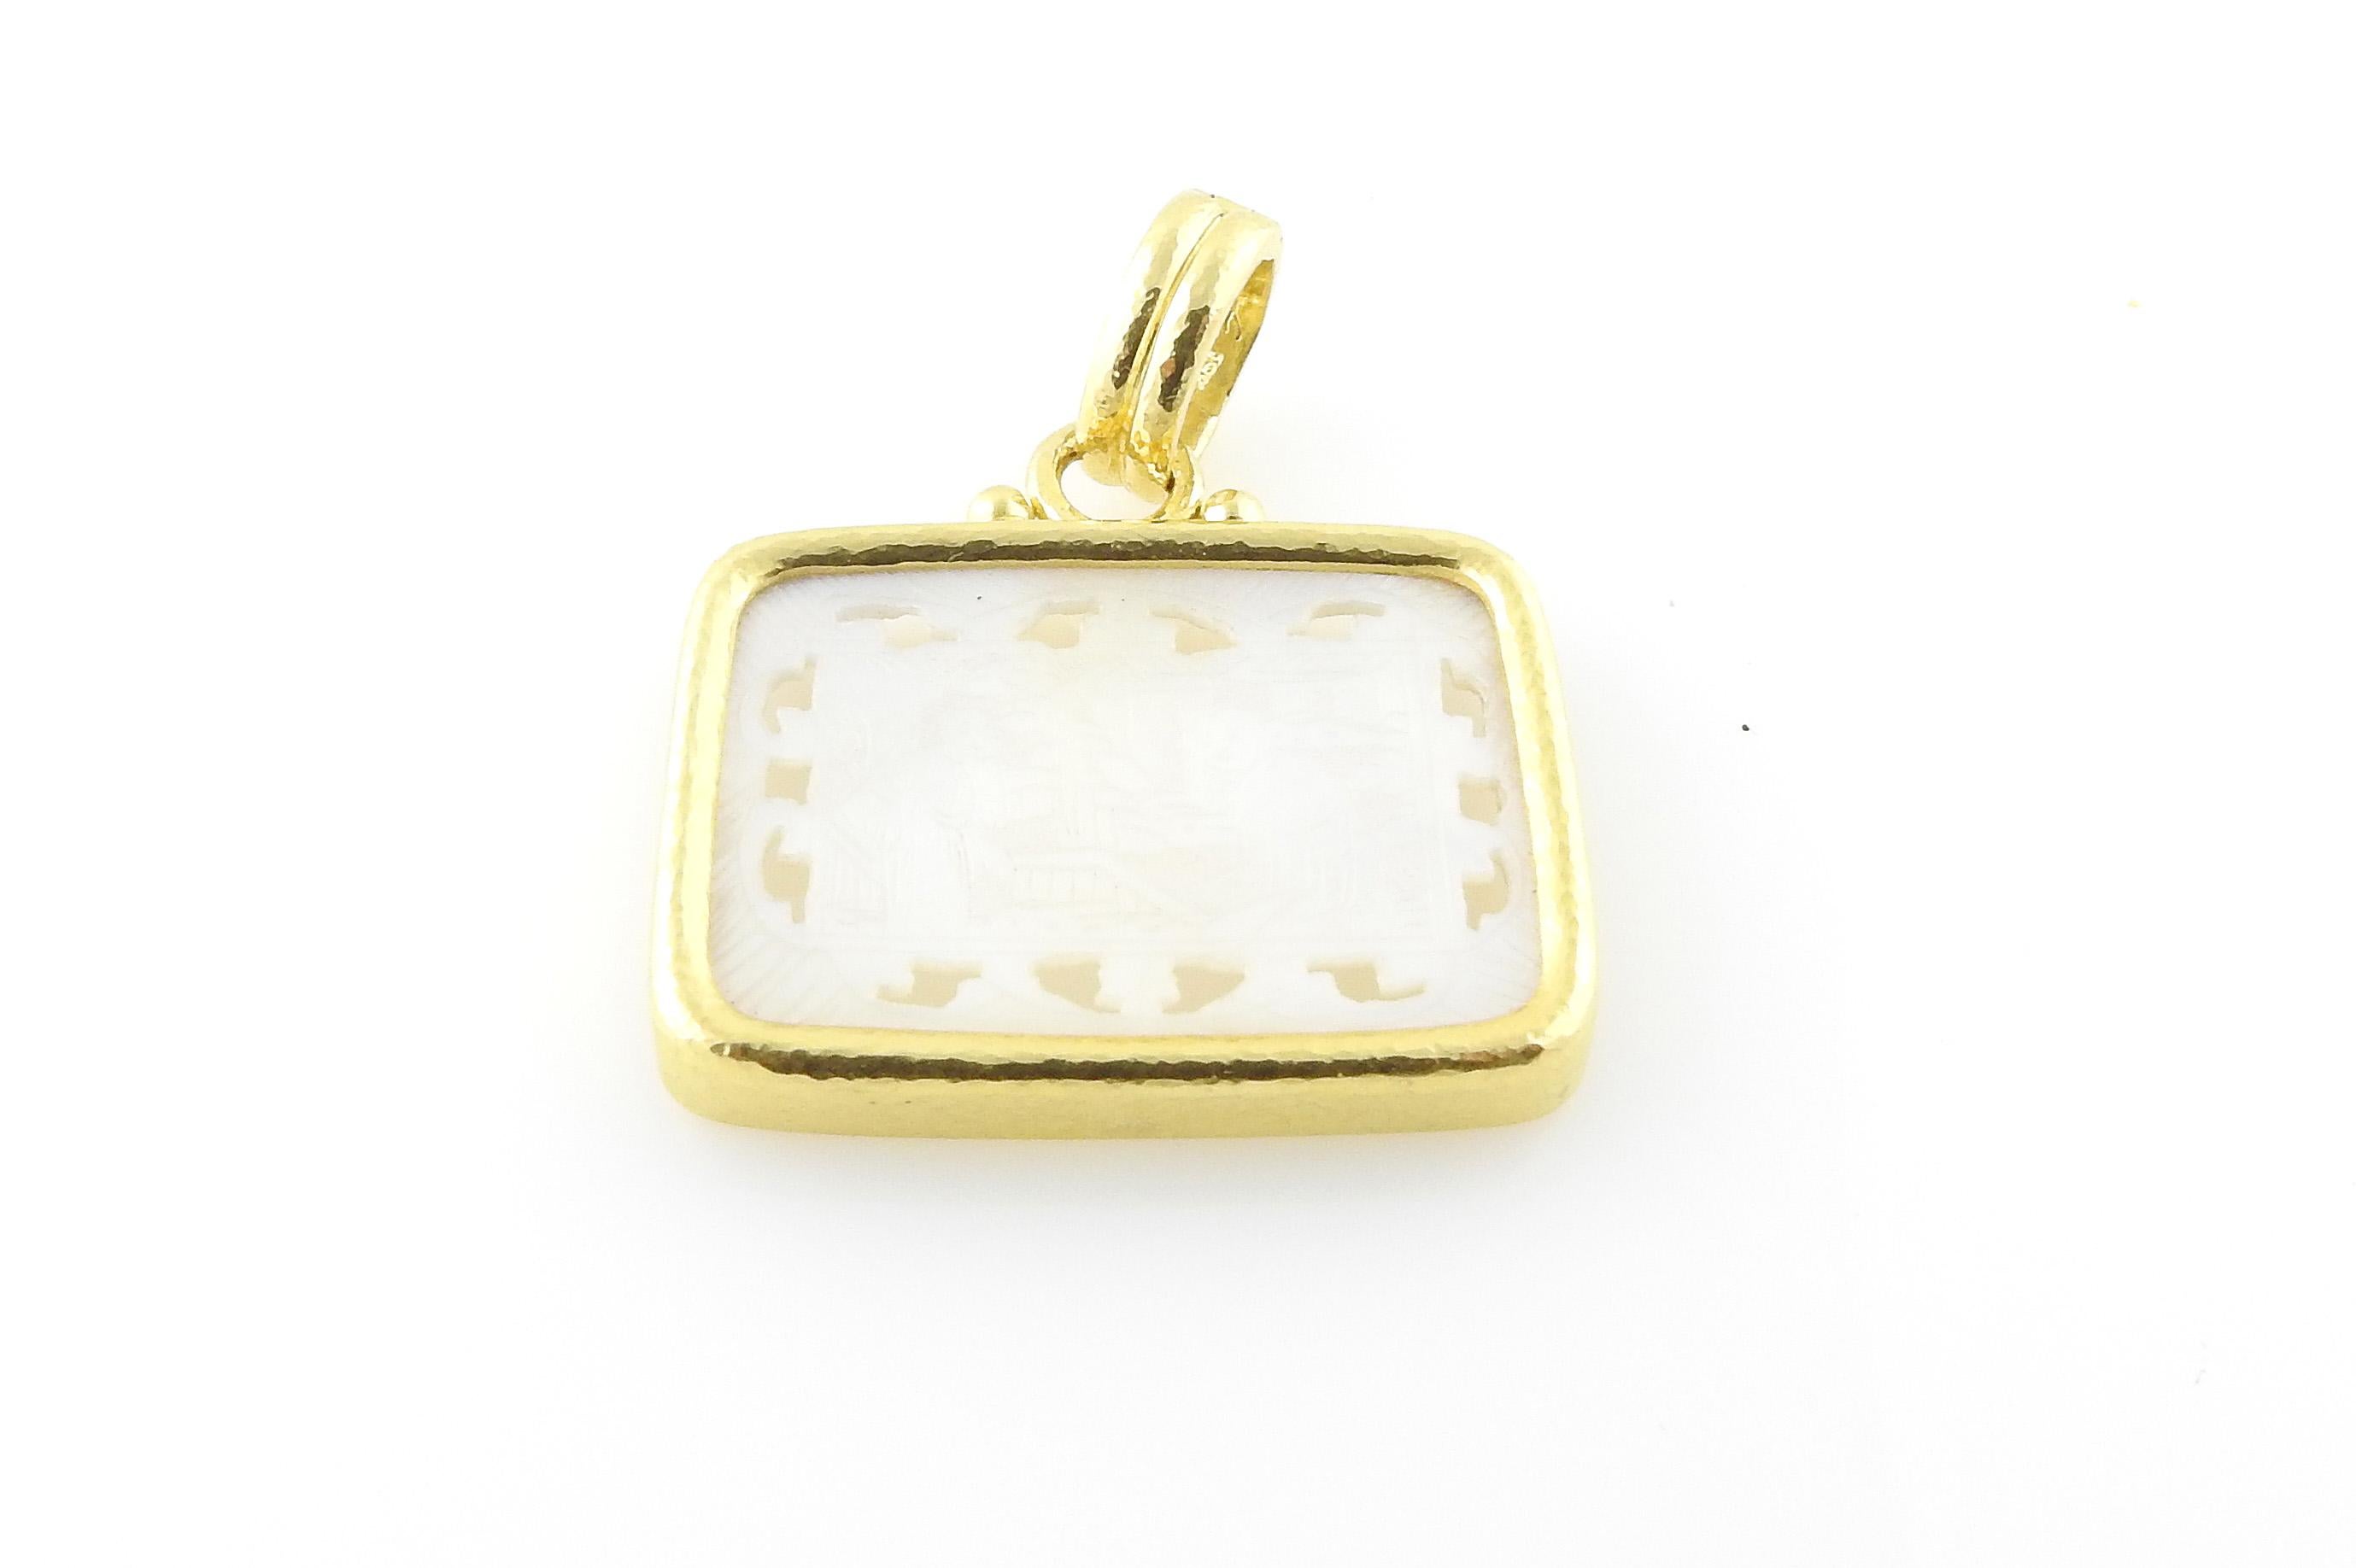 Elizabeth Locke 19K Hammered Yellow Gold Enhancer

This detailed 19K hammered yellow gold enhancer features a center carved mother of pearl stone depicting a town scene.

The pendant is approx. 34.5mm x 25mm x 4.5 mm

With enhancer, the pendant is